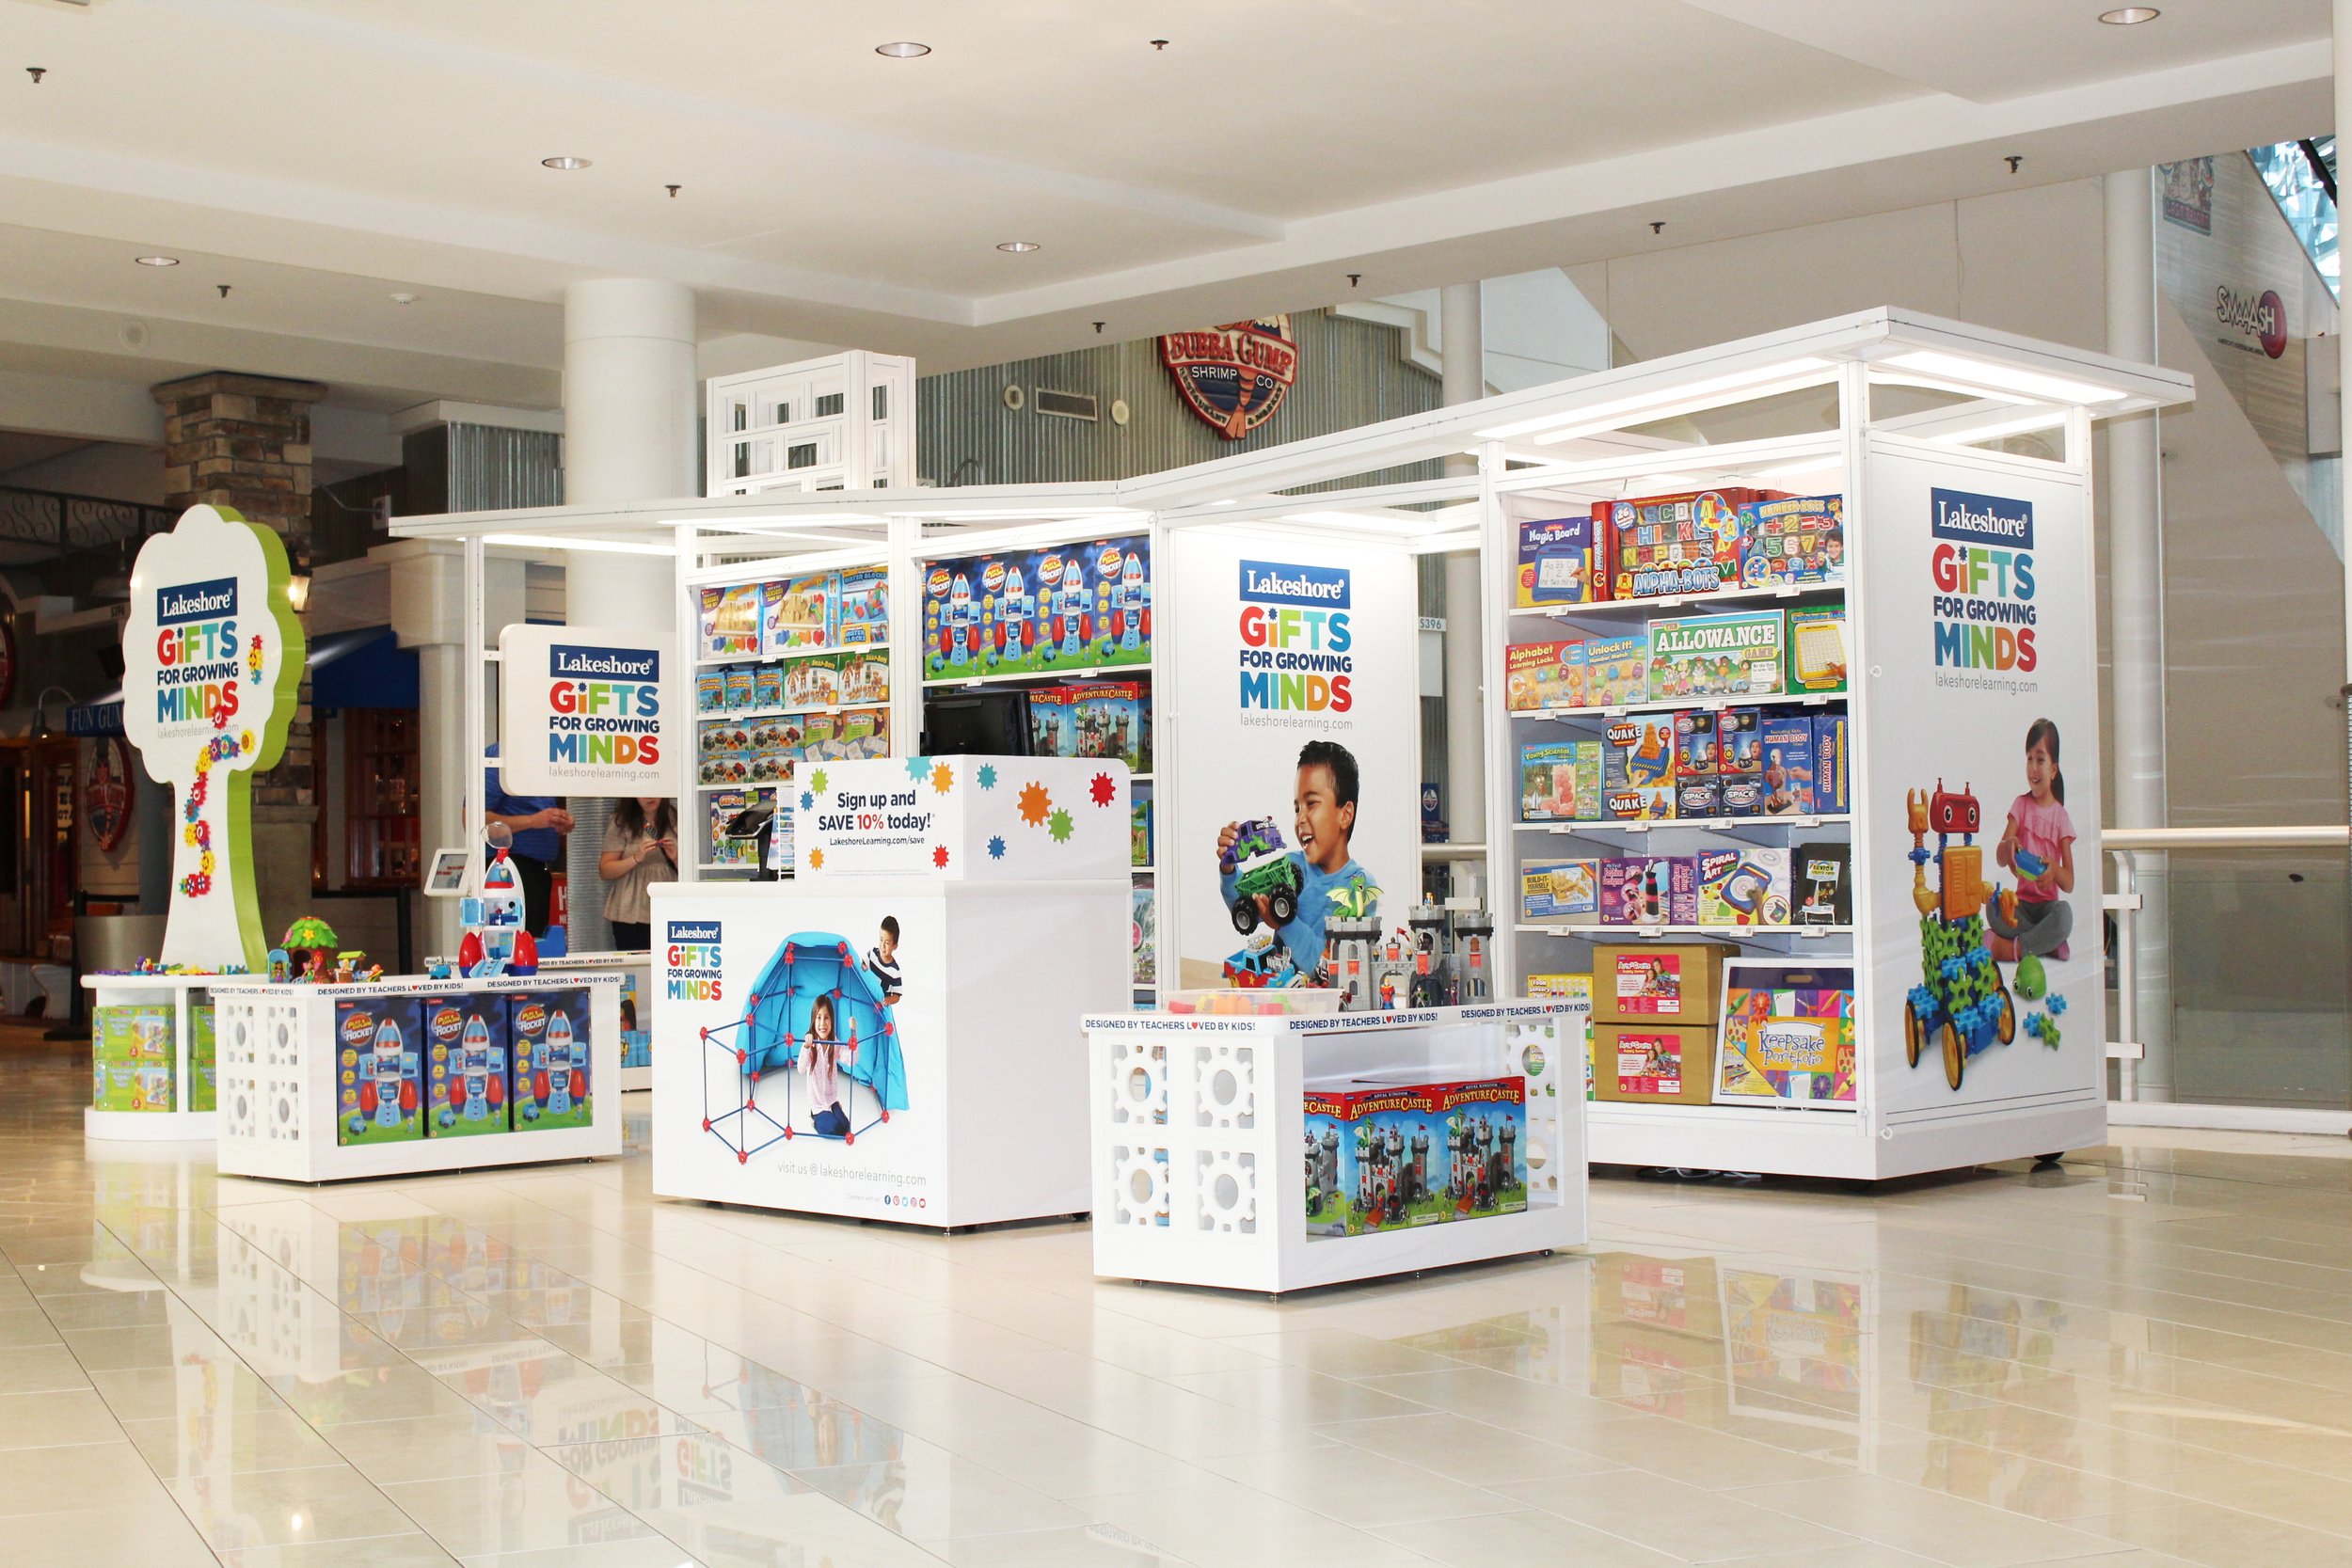  In the fall of 2019, Lakeshore Creative launched a Pop-Up shop at the Mall of America.   With this project, my team was able to invent a new retail experience, focussed on hands-on play. 